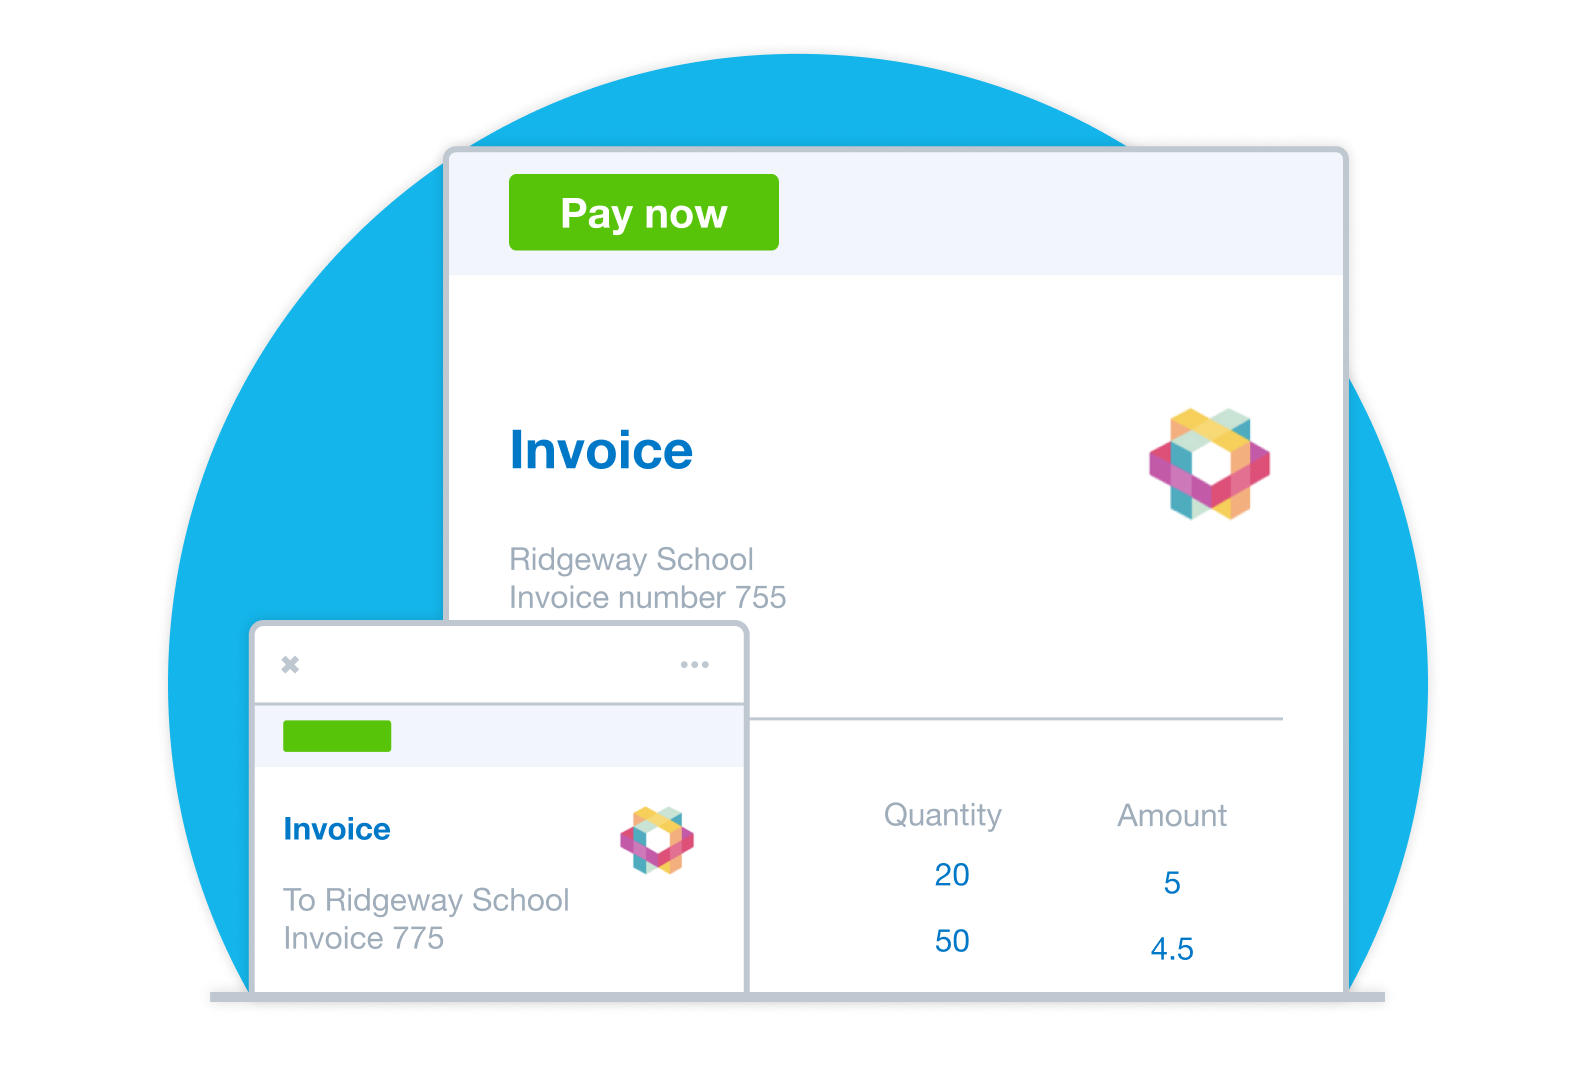 A Xero invoice displays on a phone and a laptop with a prominent pay now button for accepting online payments.